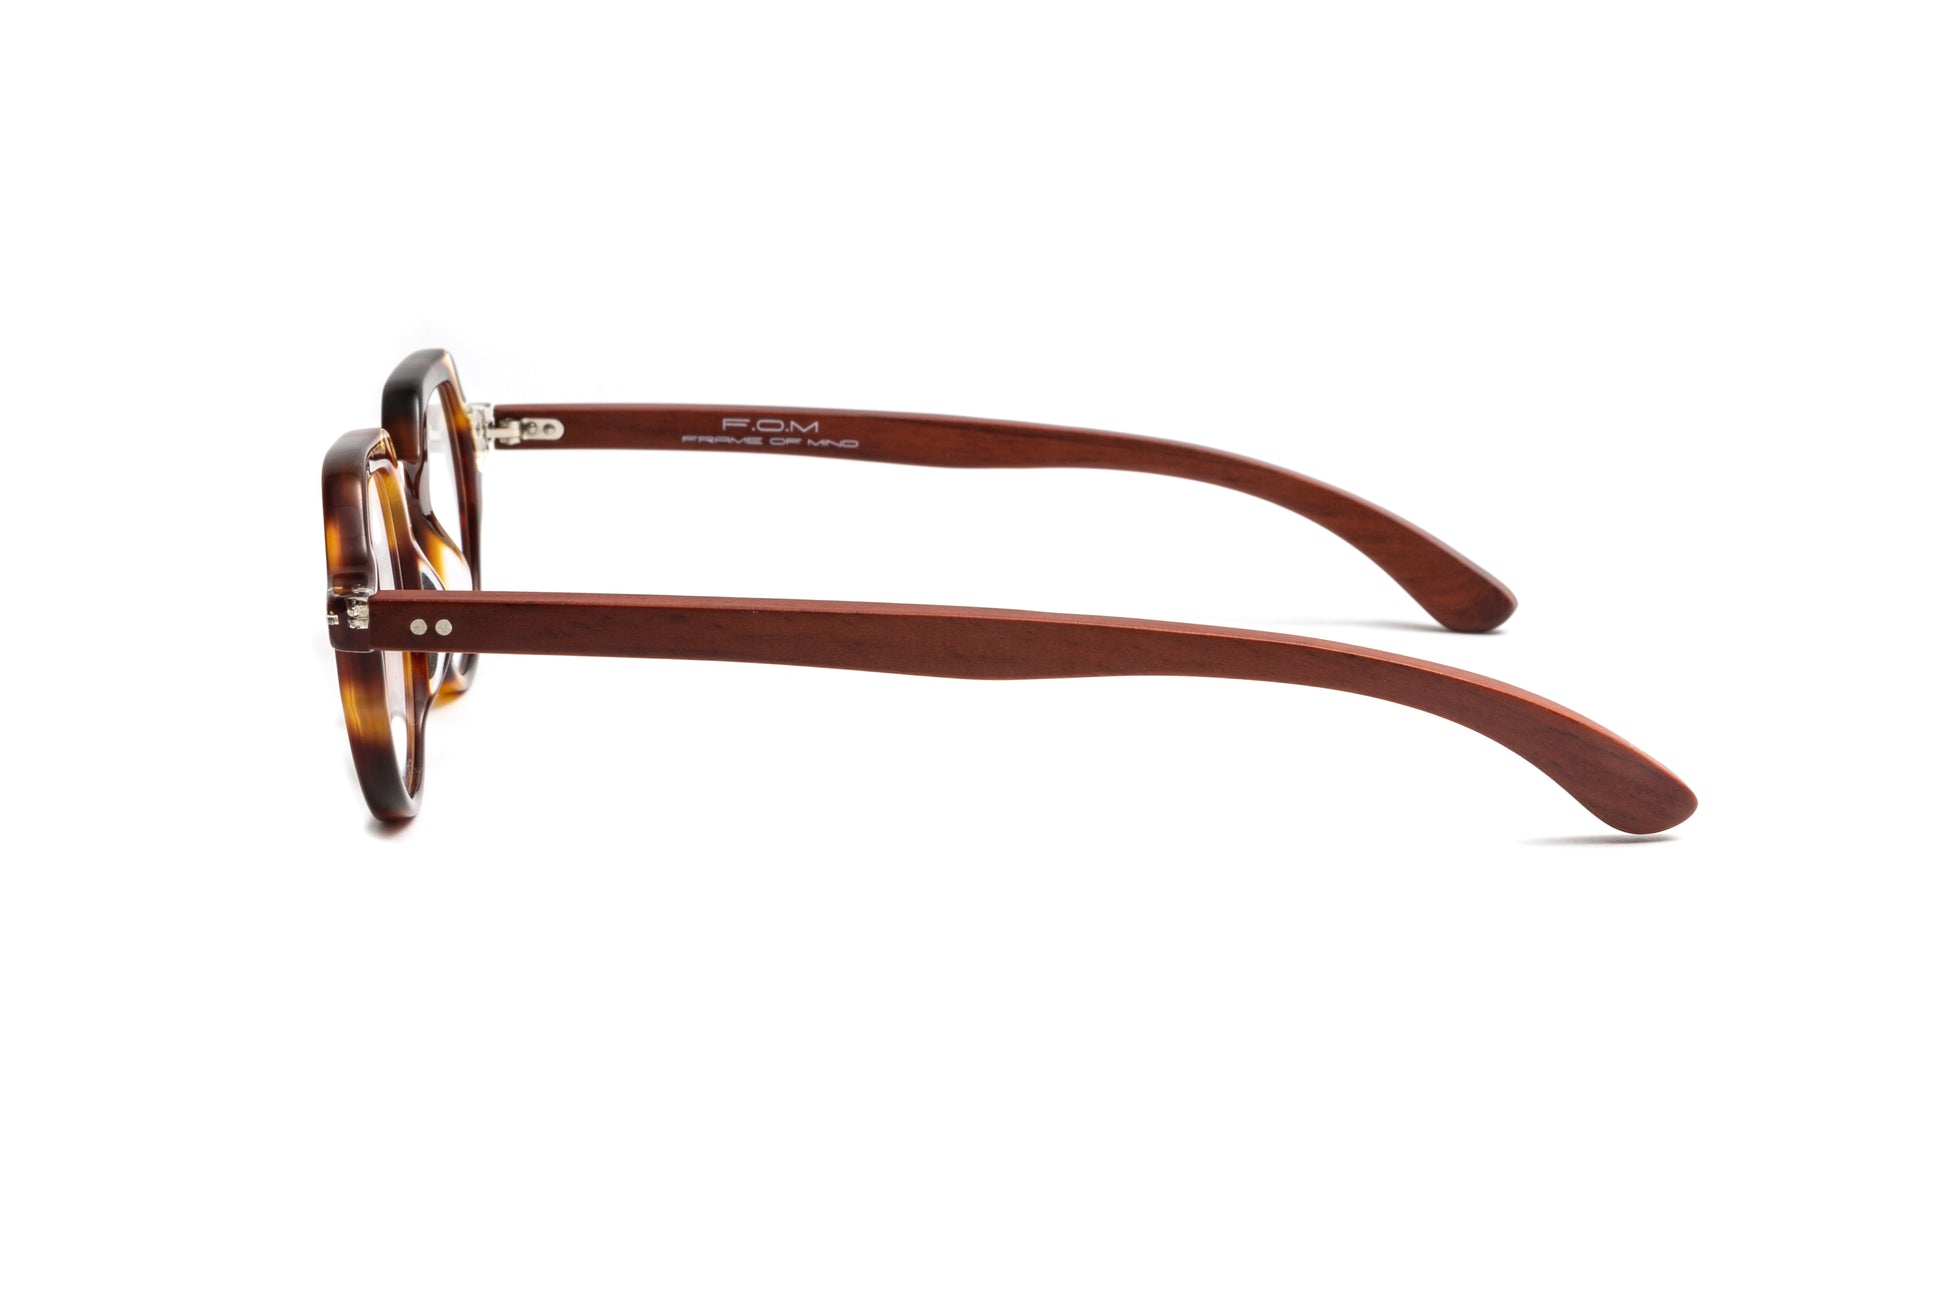 St Tropez round unisex reading glasses with a tortoise and clear frame and cherry wood temples by Eyejets